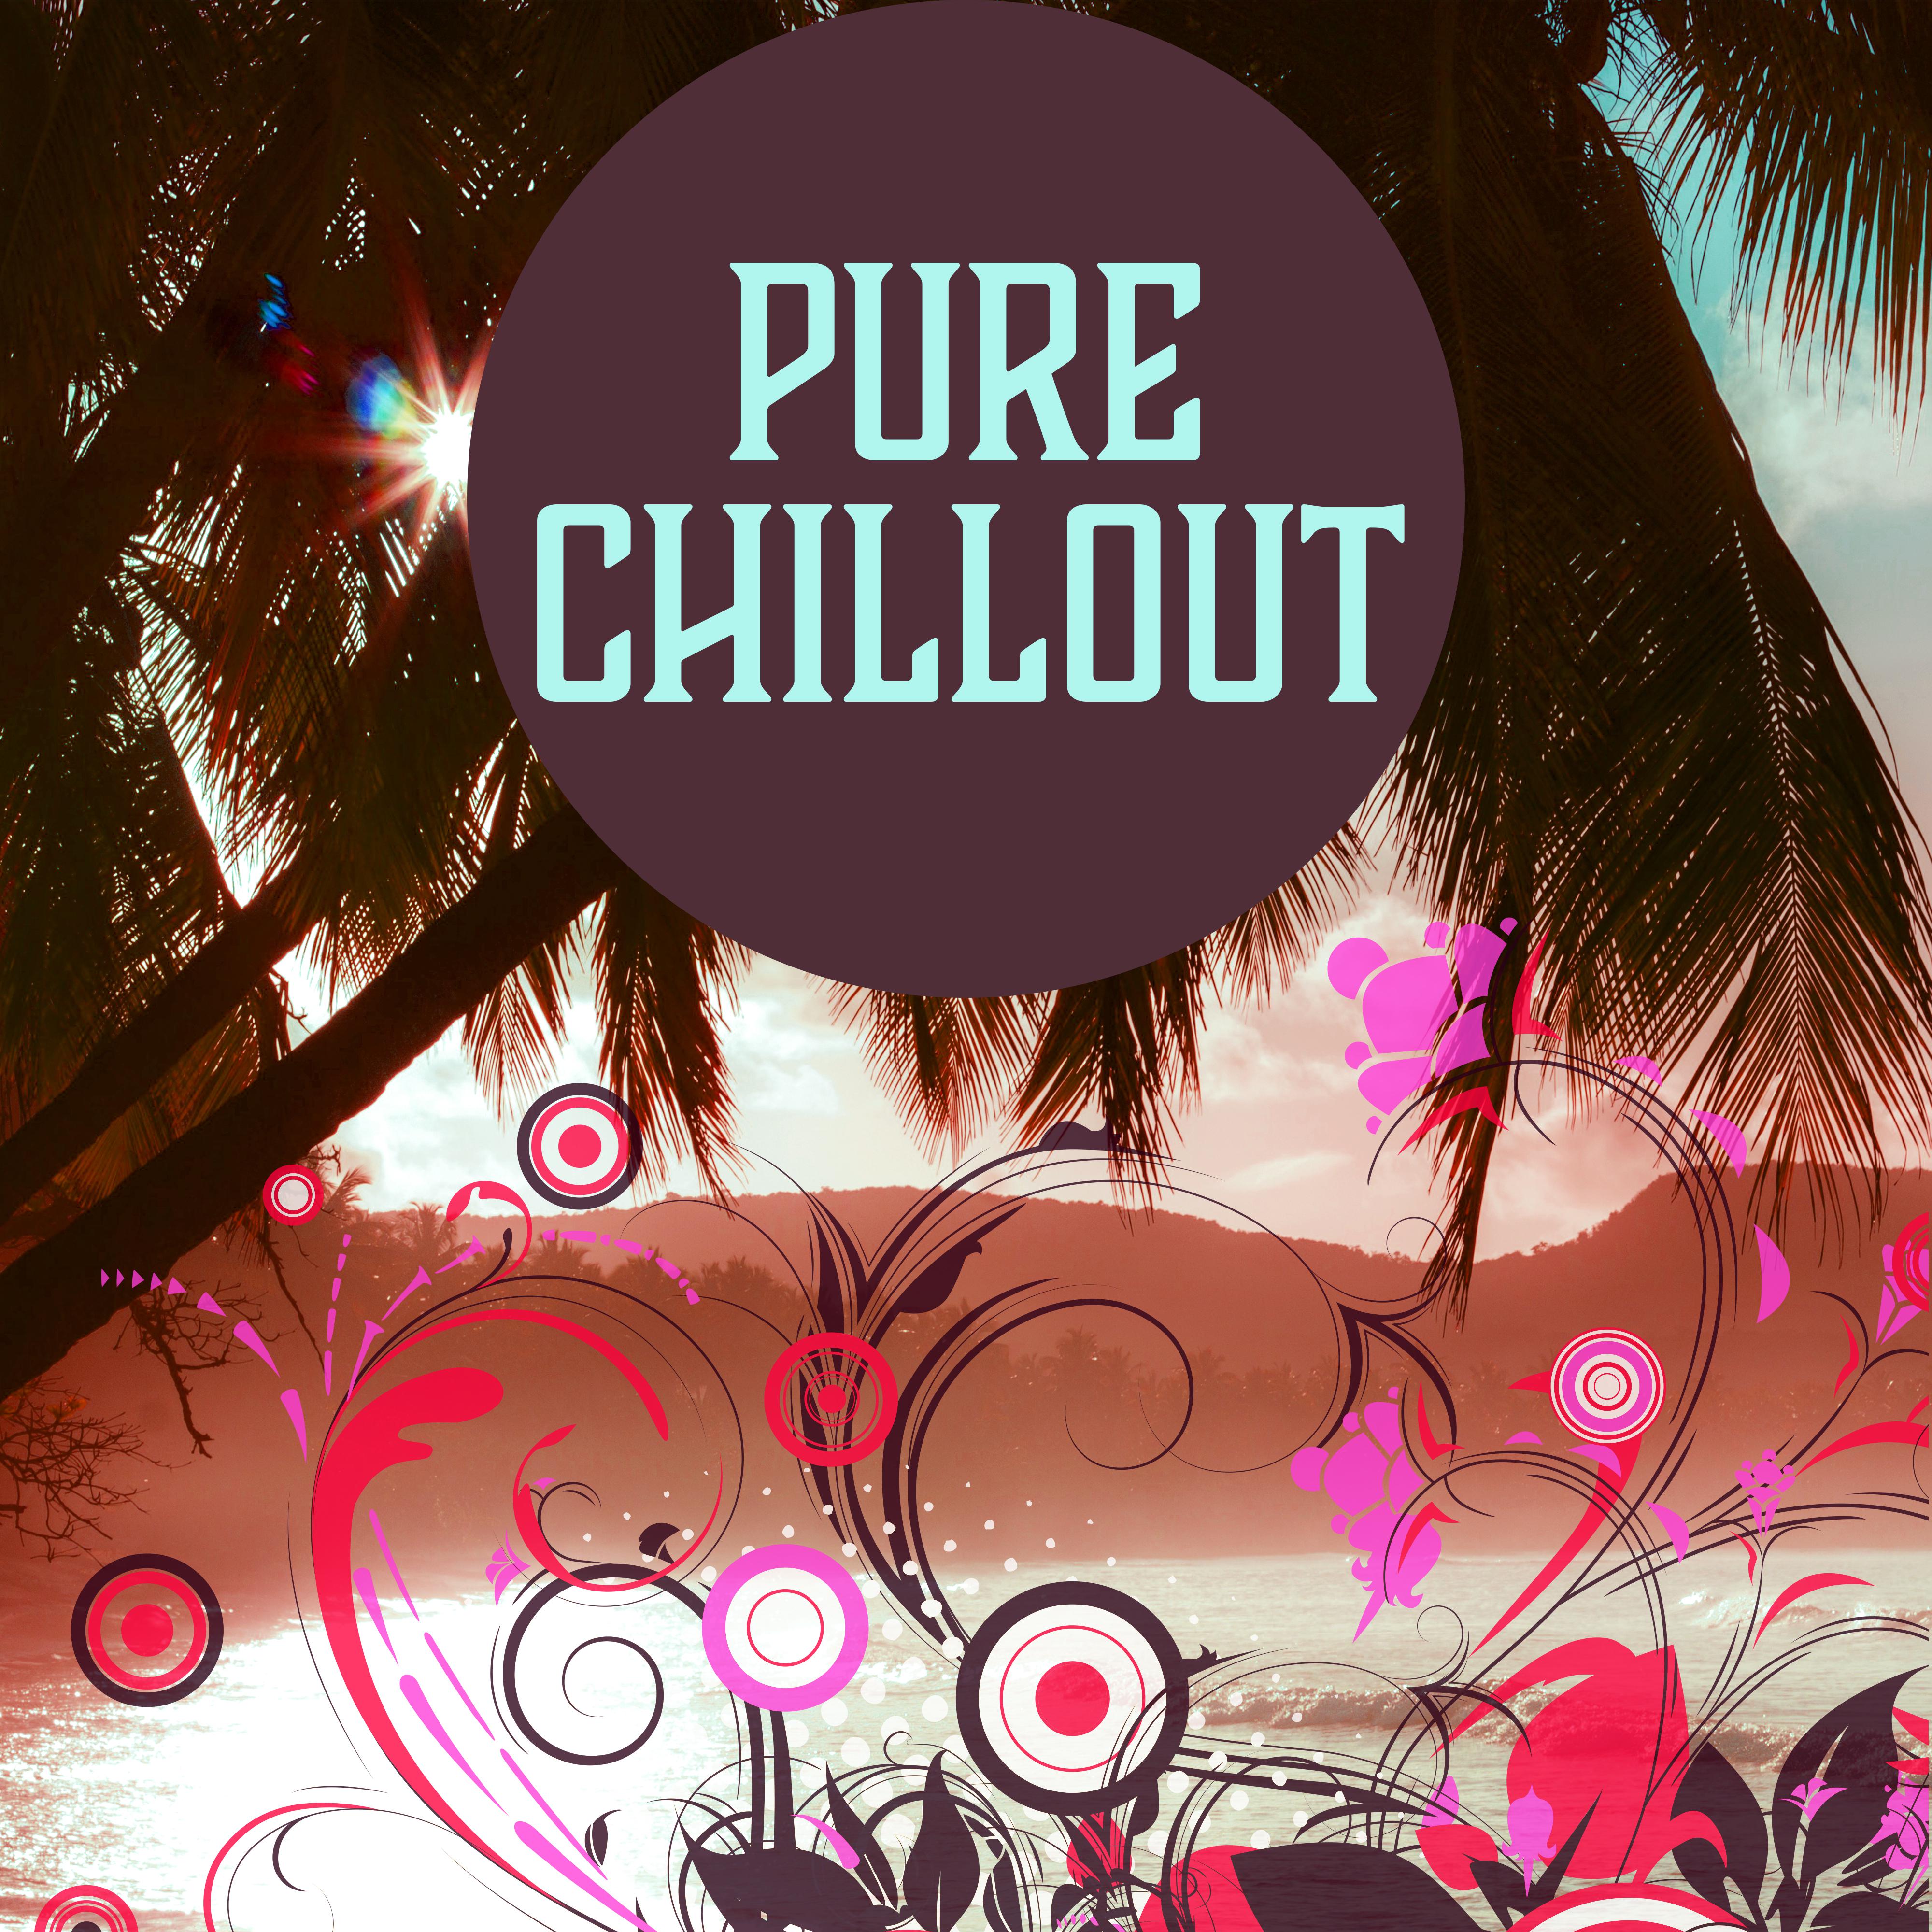 Pure Chillout  Deep Chillout Lounge, Summer Vibes, Relaxation Music, Electronic Sounds, Chillout Trance Music